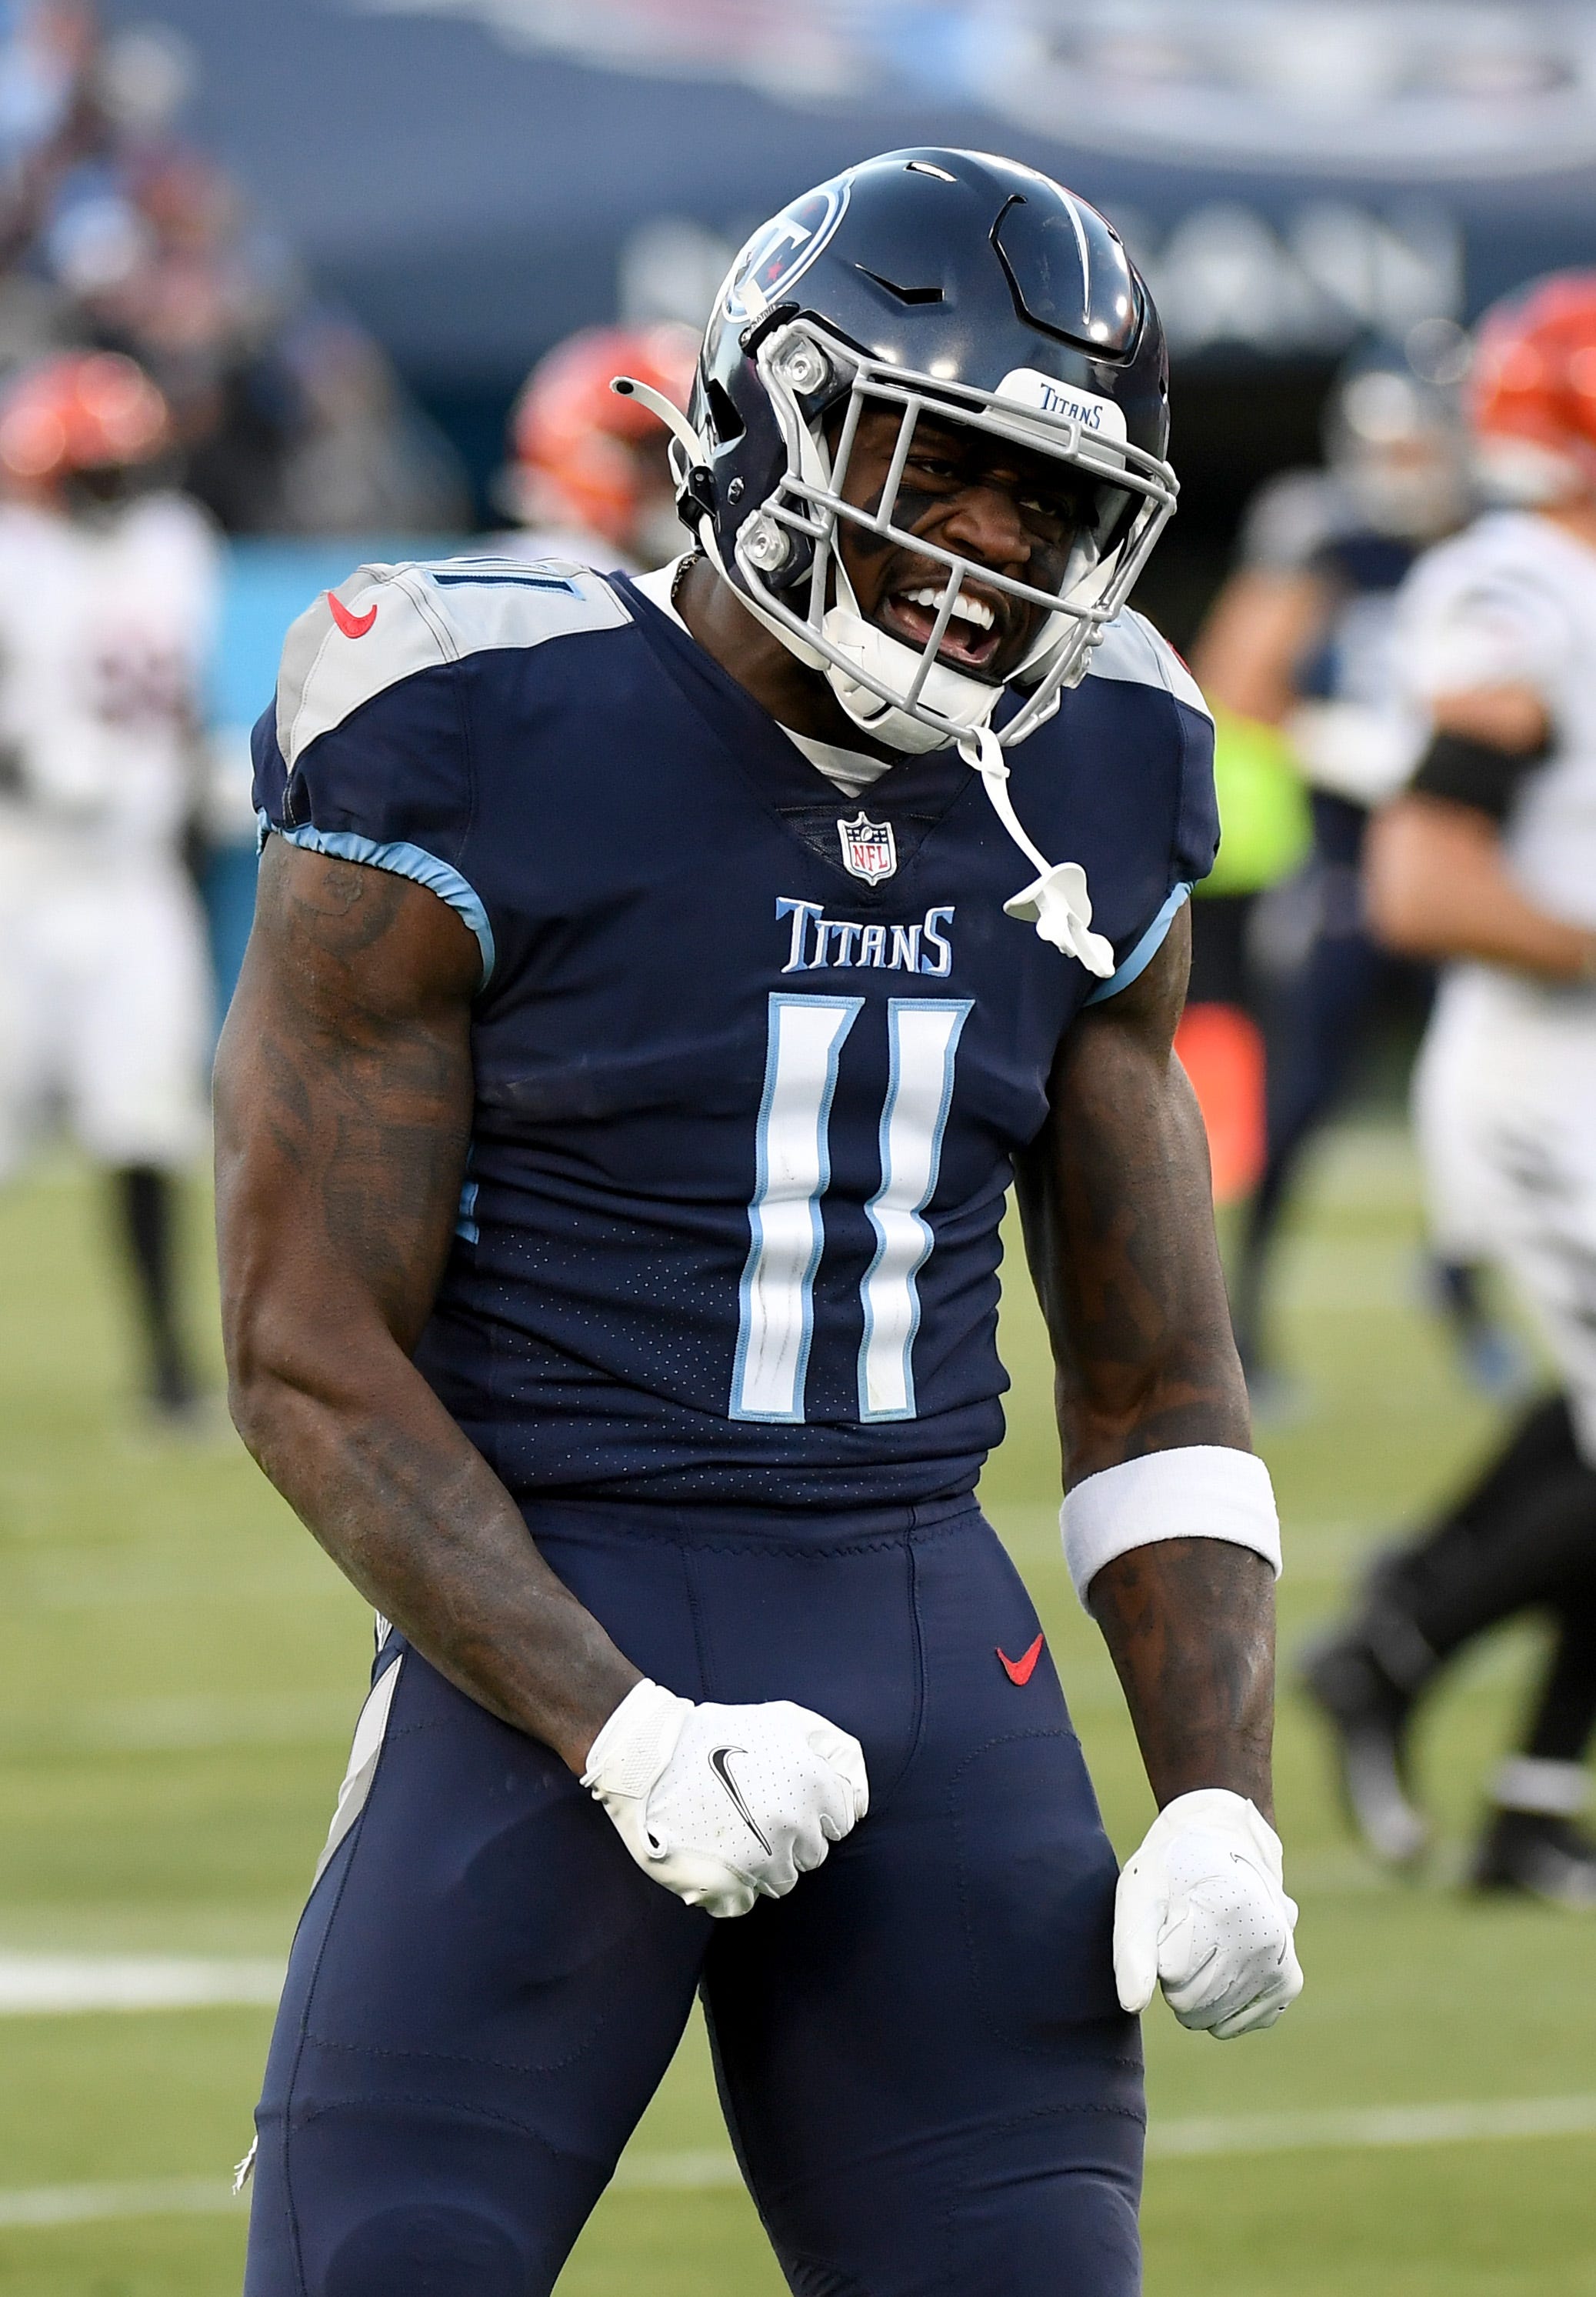 WR A.J. Brown: Traded to Eagles (previous team: Titans)